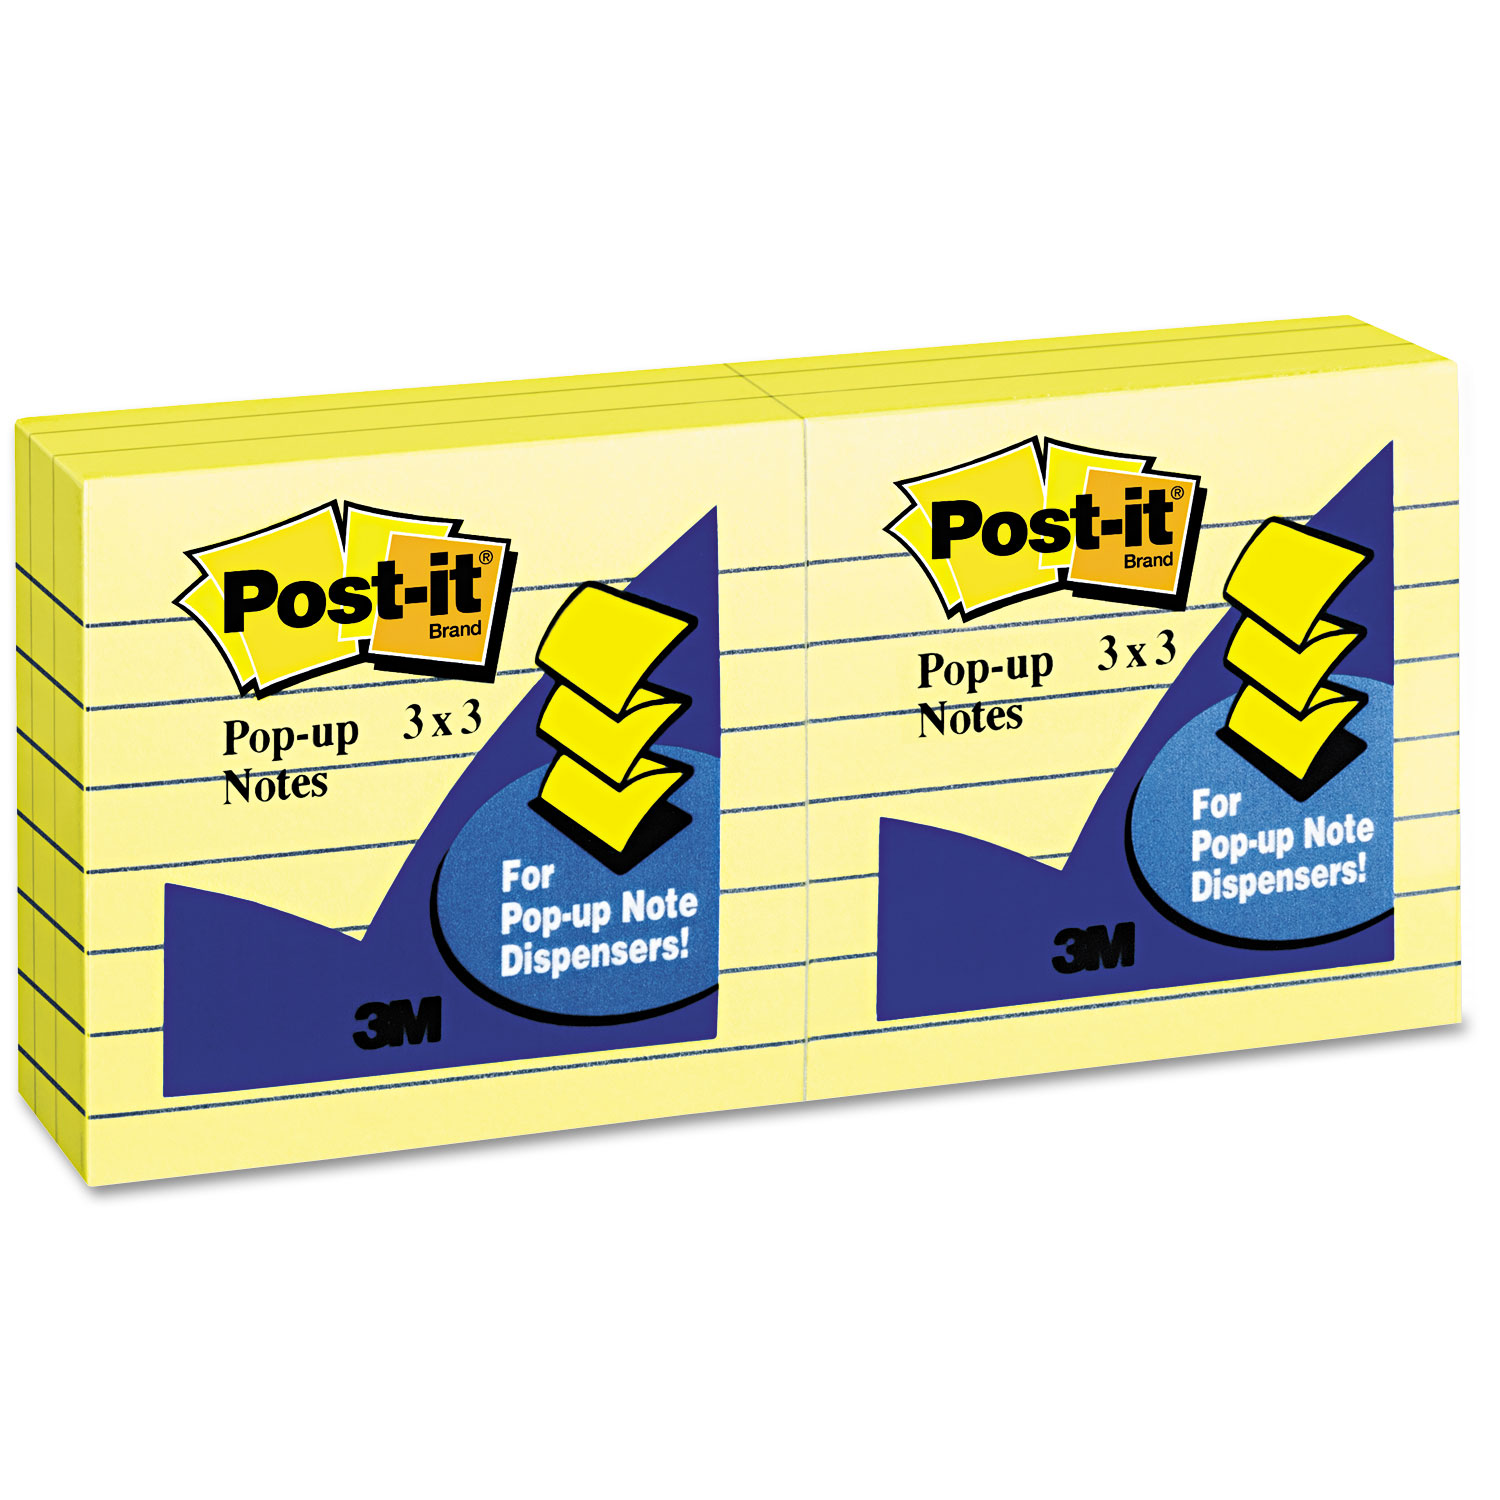  Post-it Pop-up Notes R335 Original Canary Yellow Pop-Up Refill, Lined, 3 x 3, 100-Sheet, 6/Pack (MMMR335YW) 